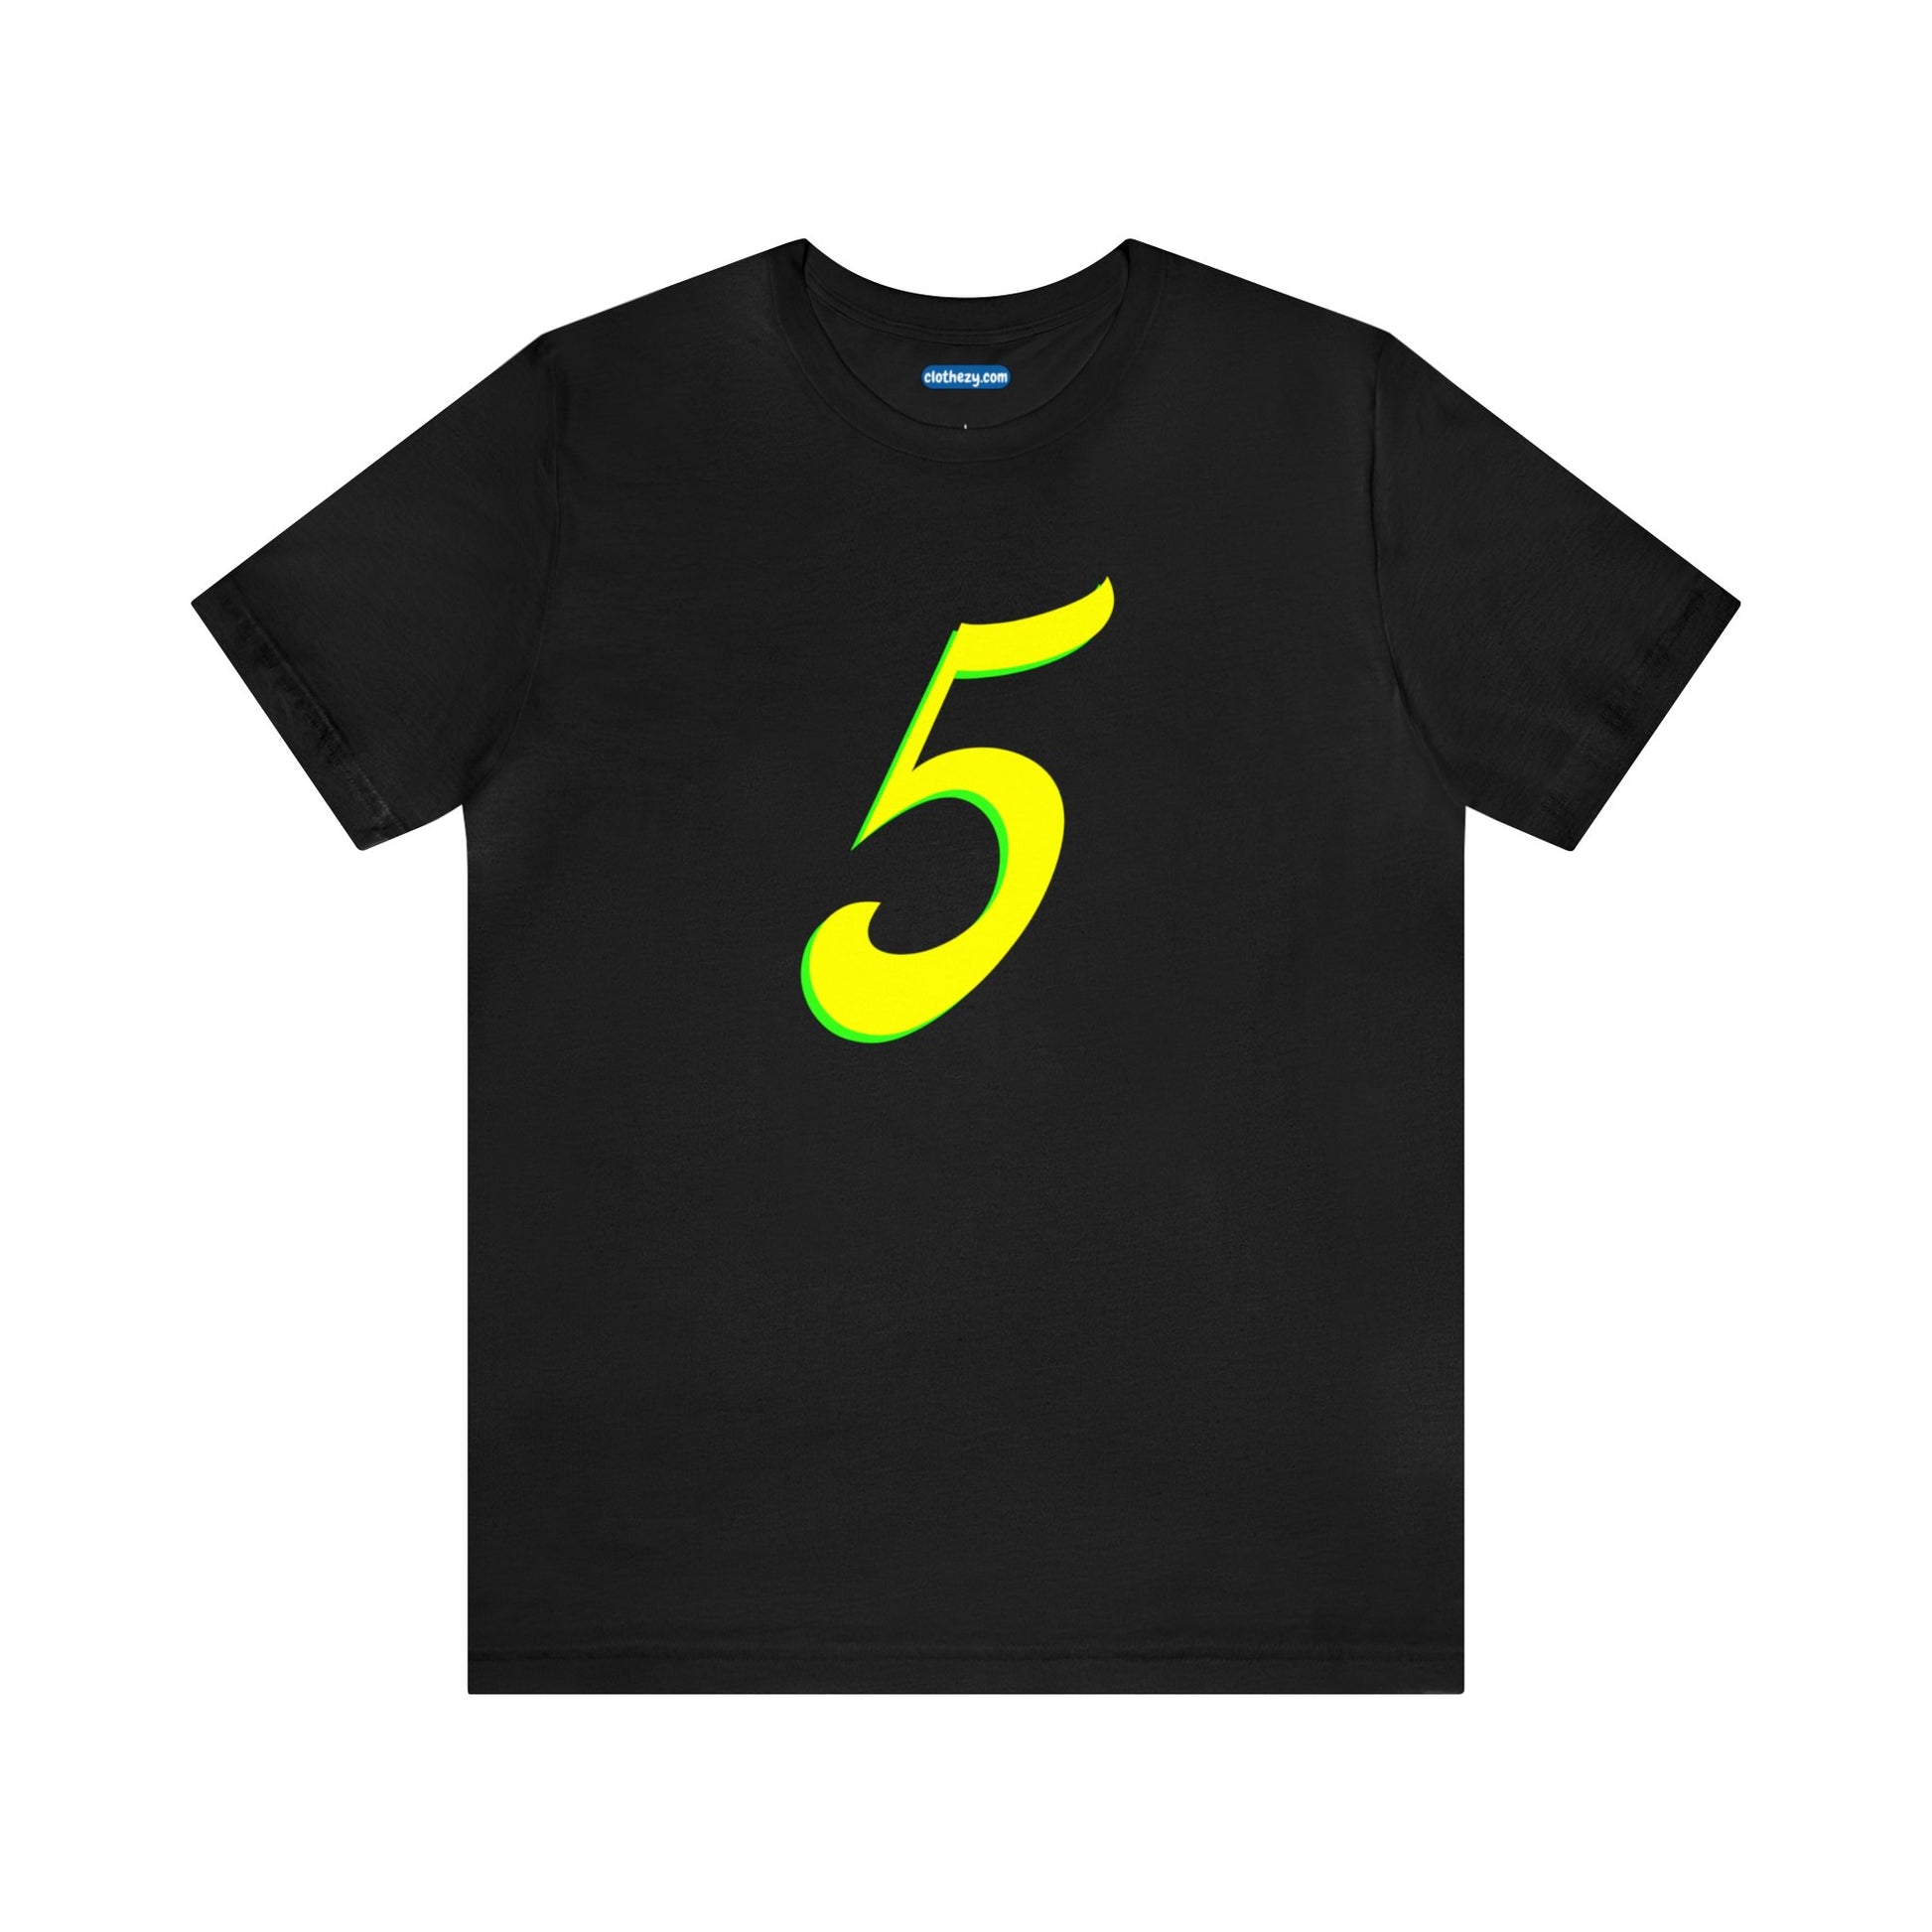 Number 5 Design - Soft Cotton Tee for birthdays and celebrations, Gift for friends and family, Multiple Options by clothezy.com in Dark Grey Heather Size Small - Buy Now